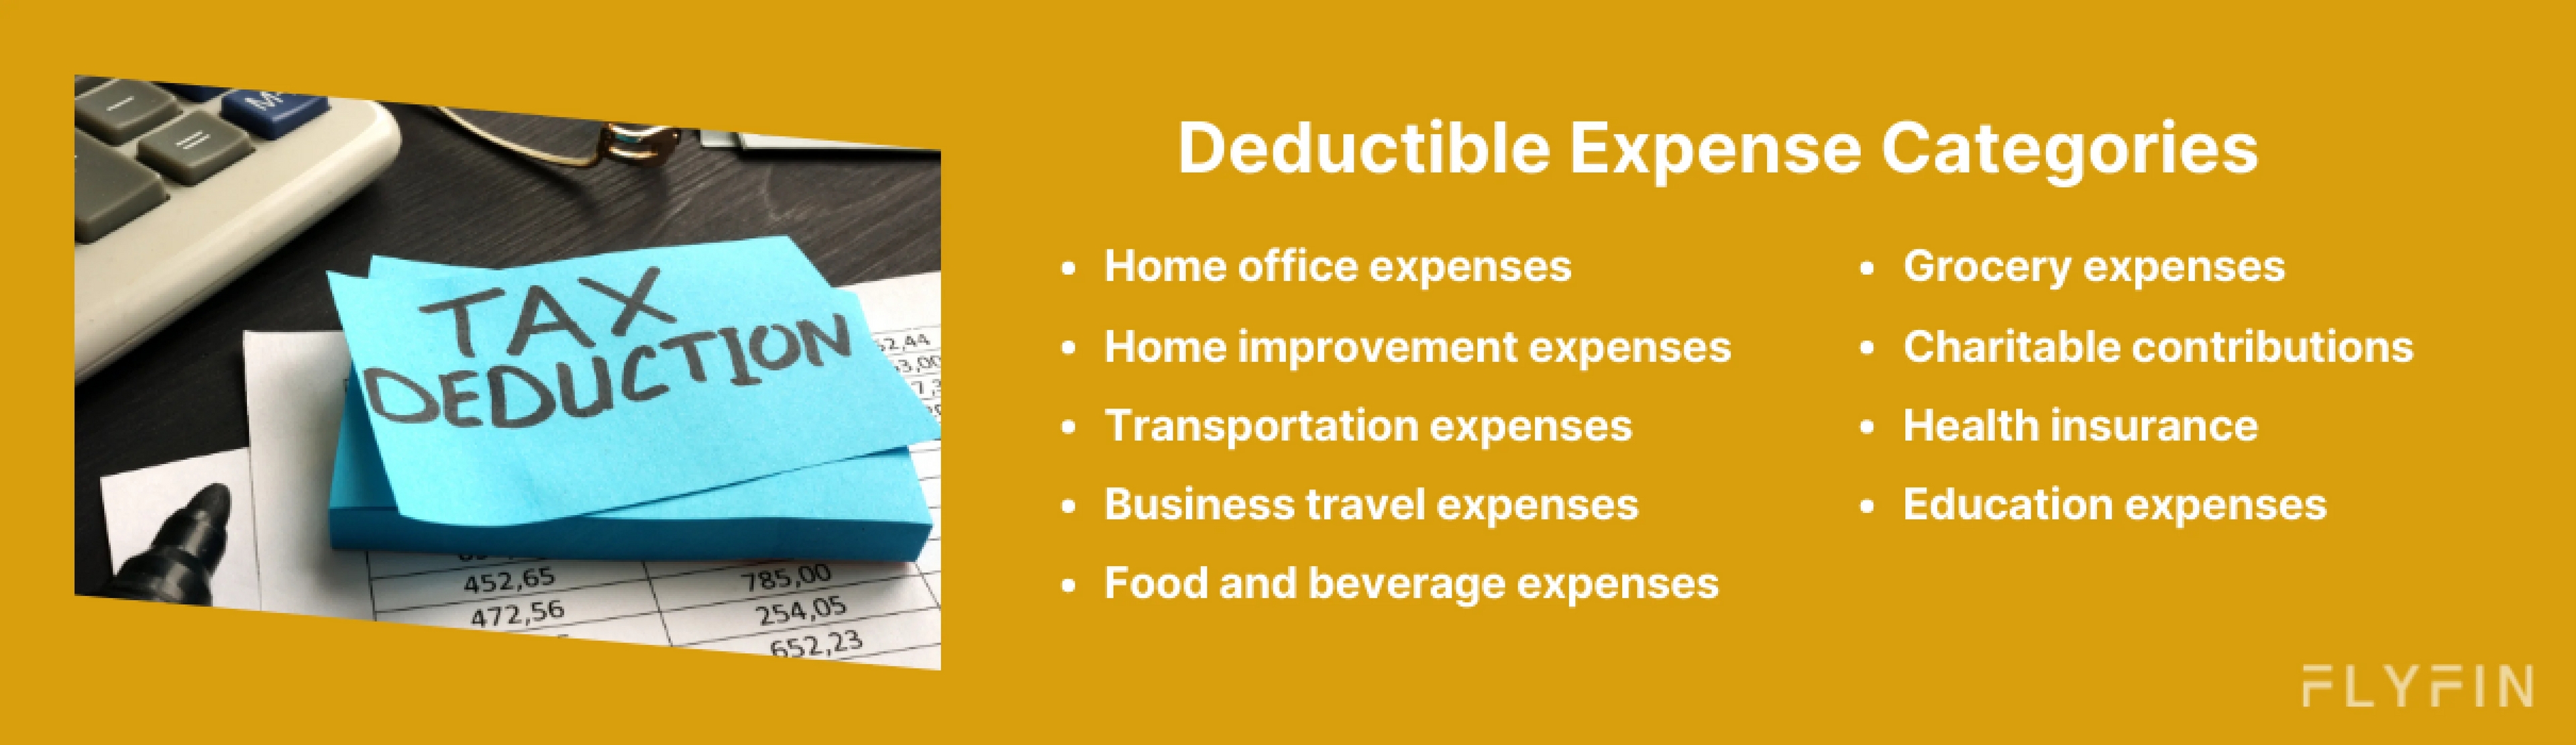 Image showing deductible expense categories including home office, transportation, food, charitable contributions, health insurance and education expenses for tax purposes. Suitable for self-employed, 1099 and freelancers.